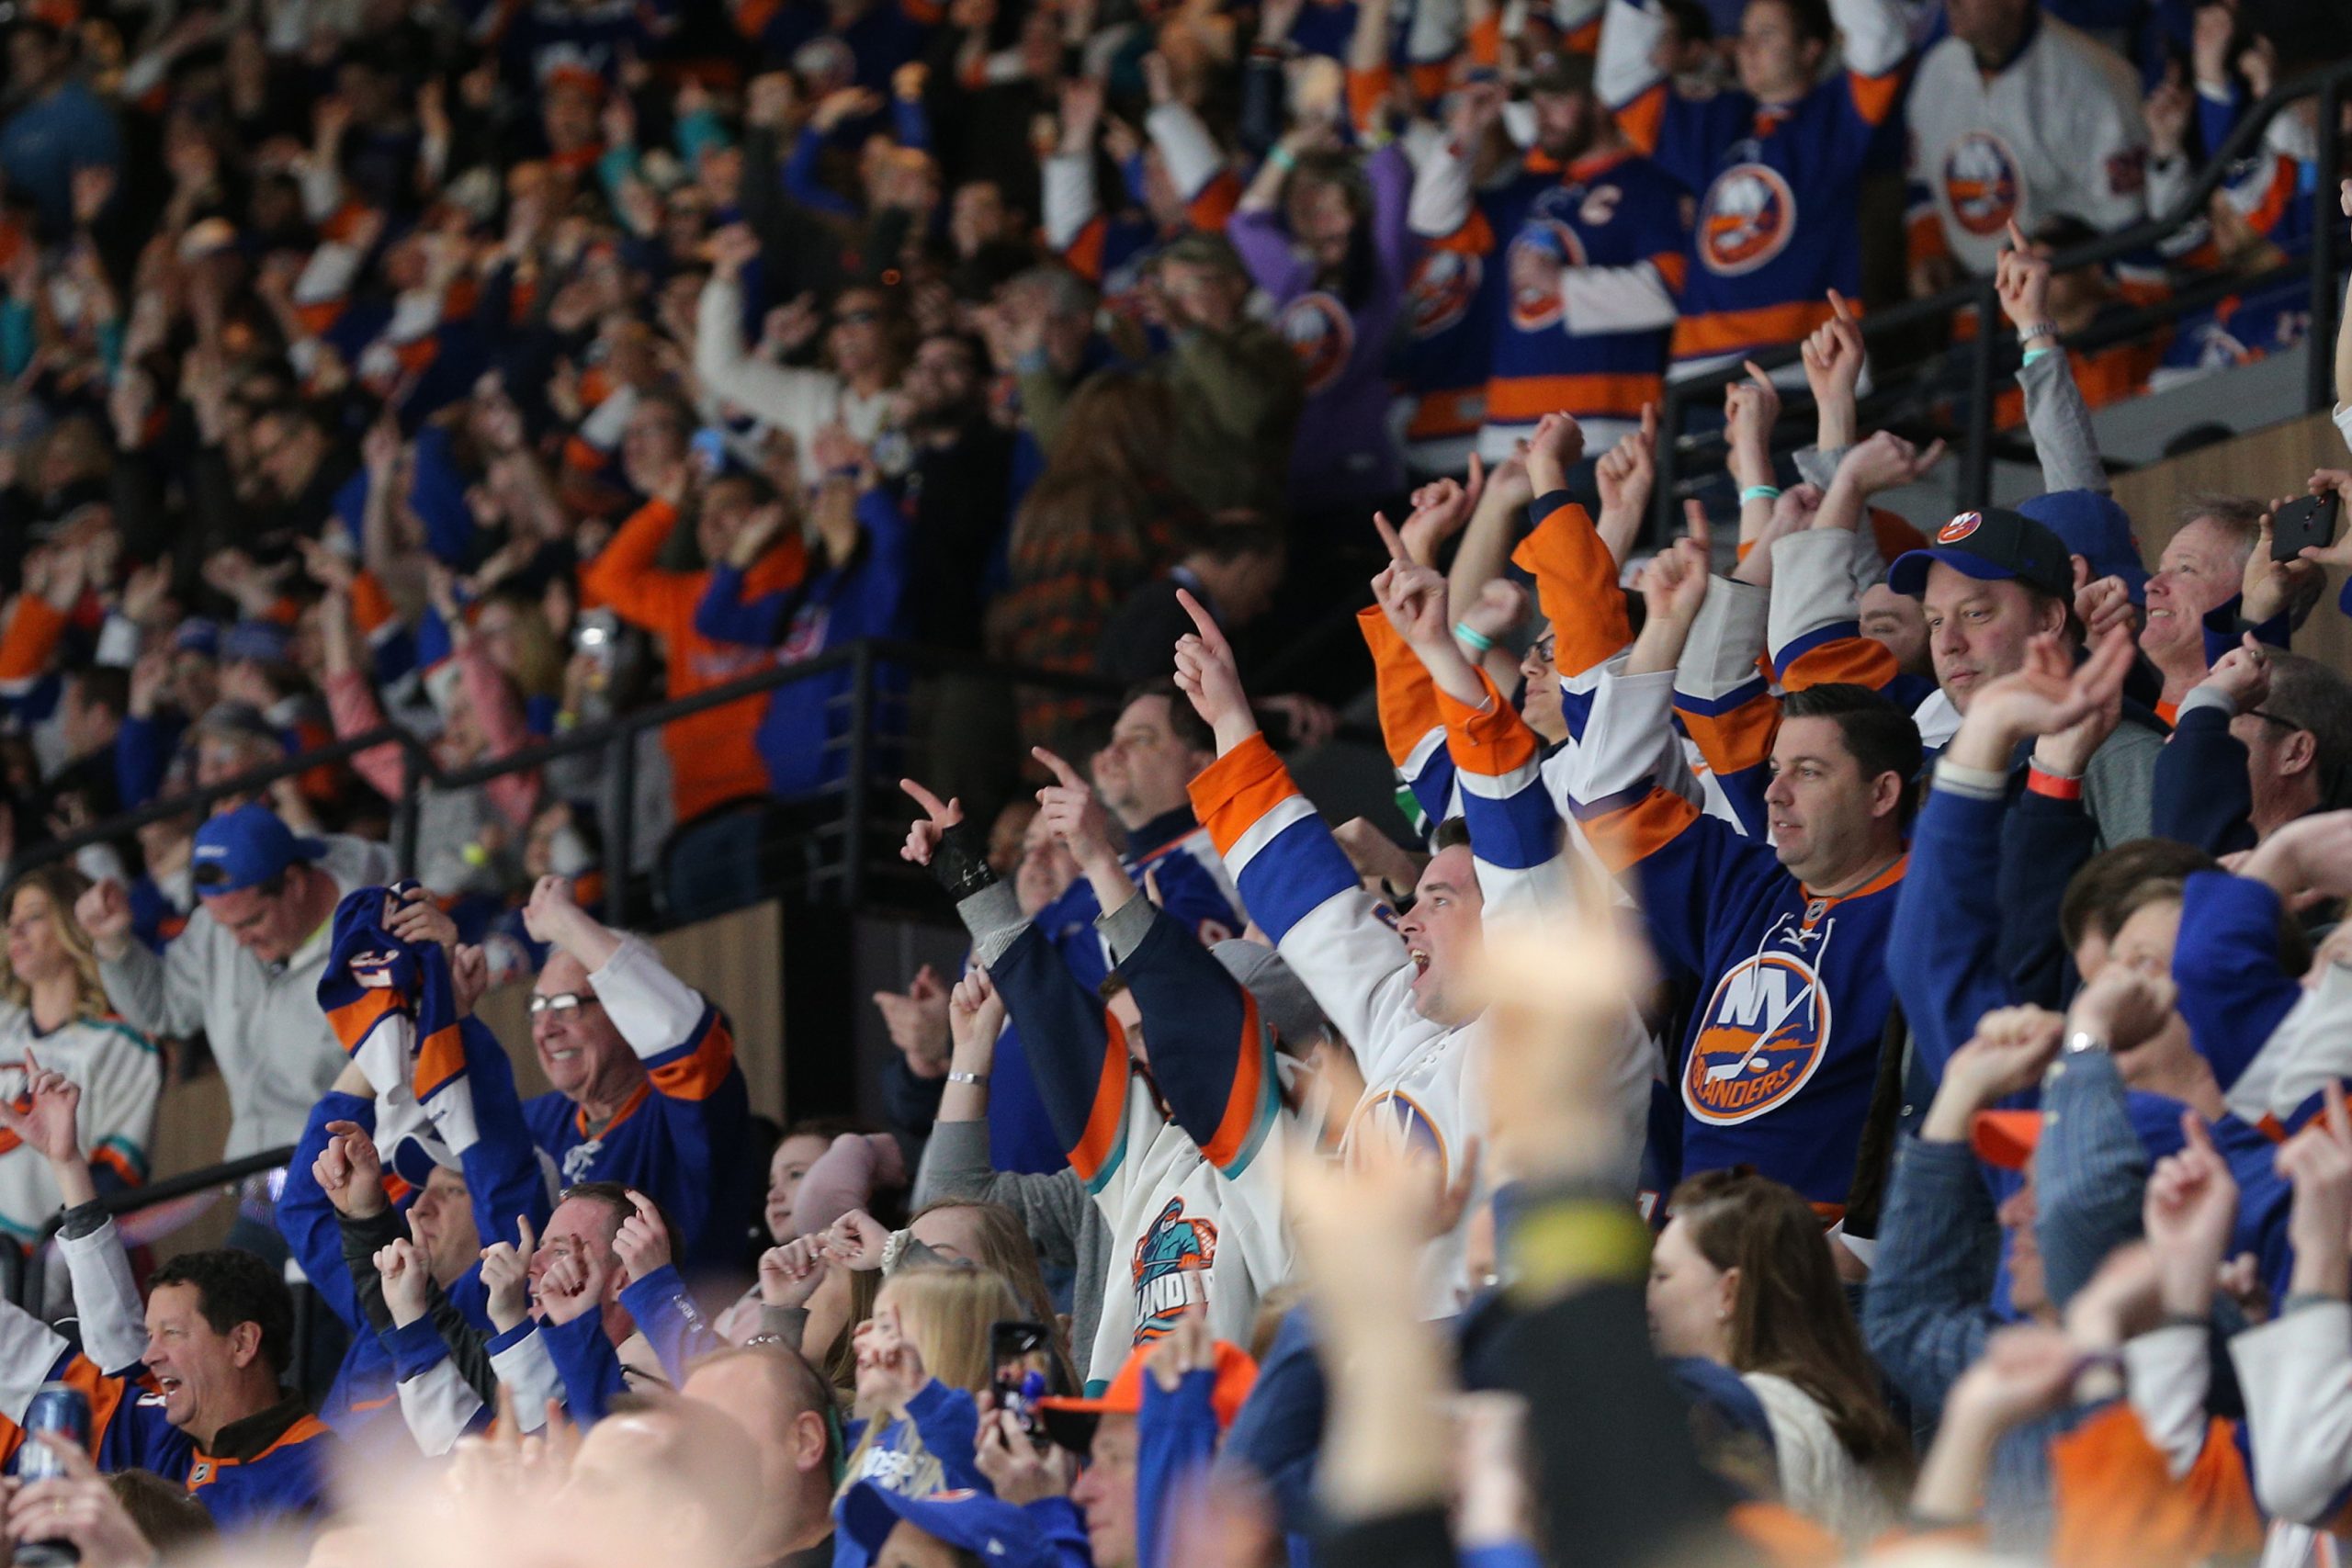 Mar 24, 2019; Uniondale, NY, USA; New York Islanders fans celebrate after an Islanders goal against the Arizona Coyotes during the third period at Nassau Veterans Memorial Coliseum. Mandatory Credit: Brad Penner-USA TODAY Sports